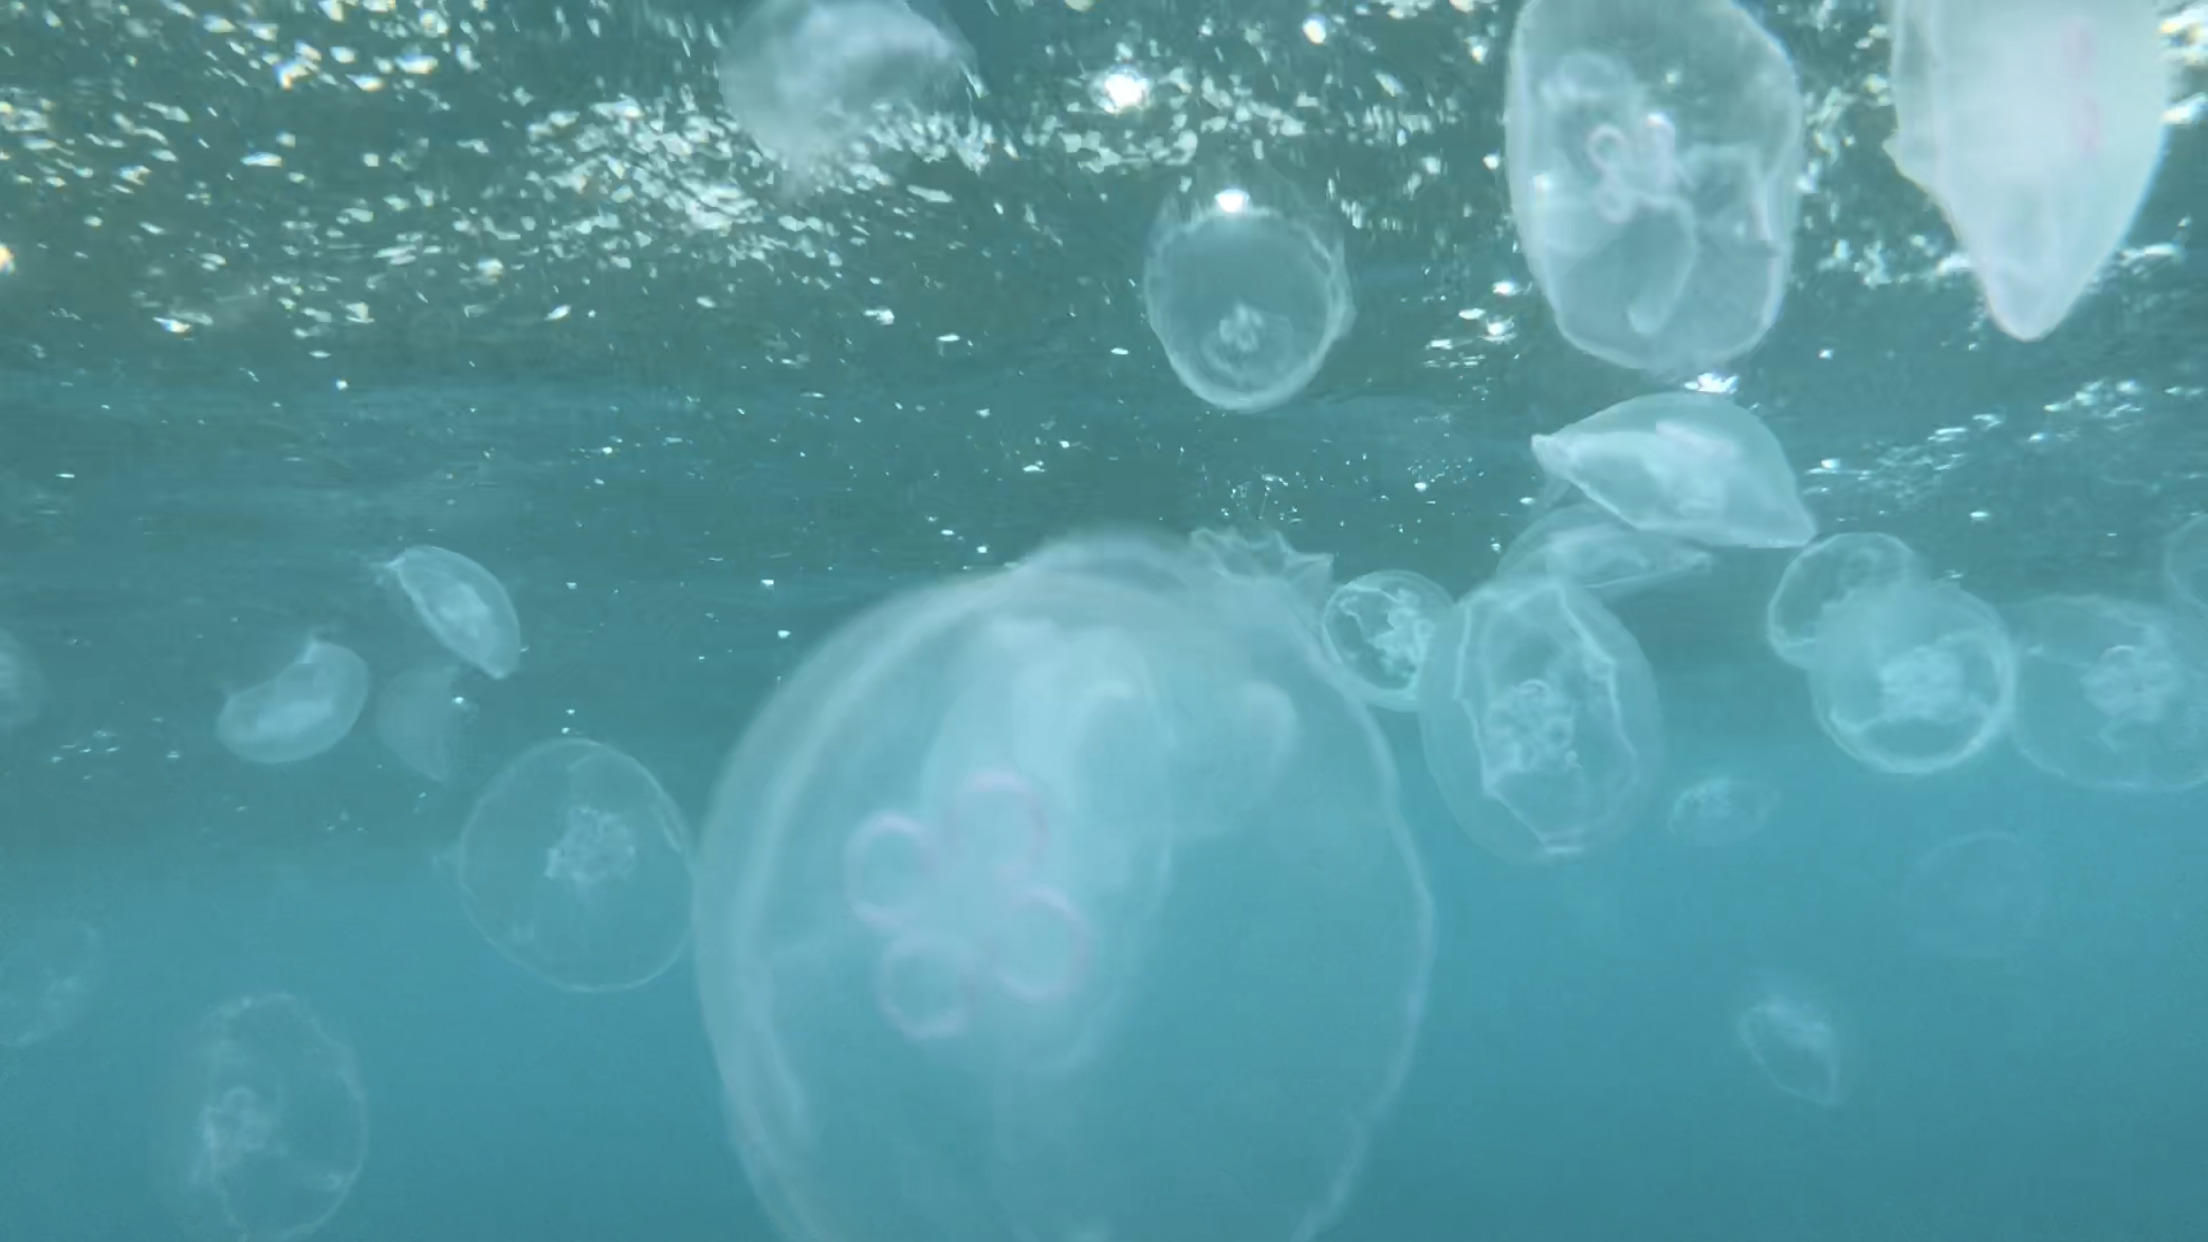  Moon jelly fish! They do sting, but they are not poisonous to humans. 